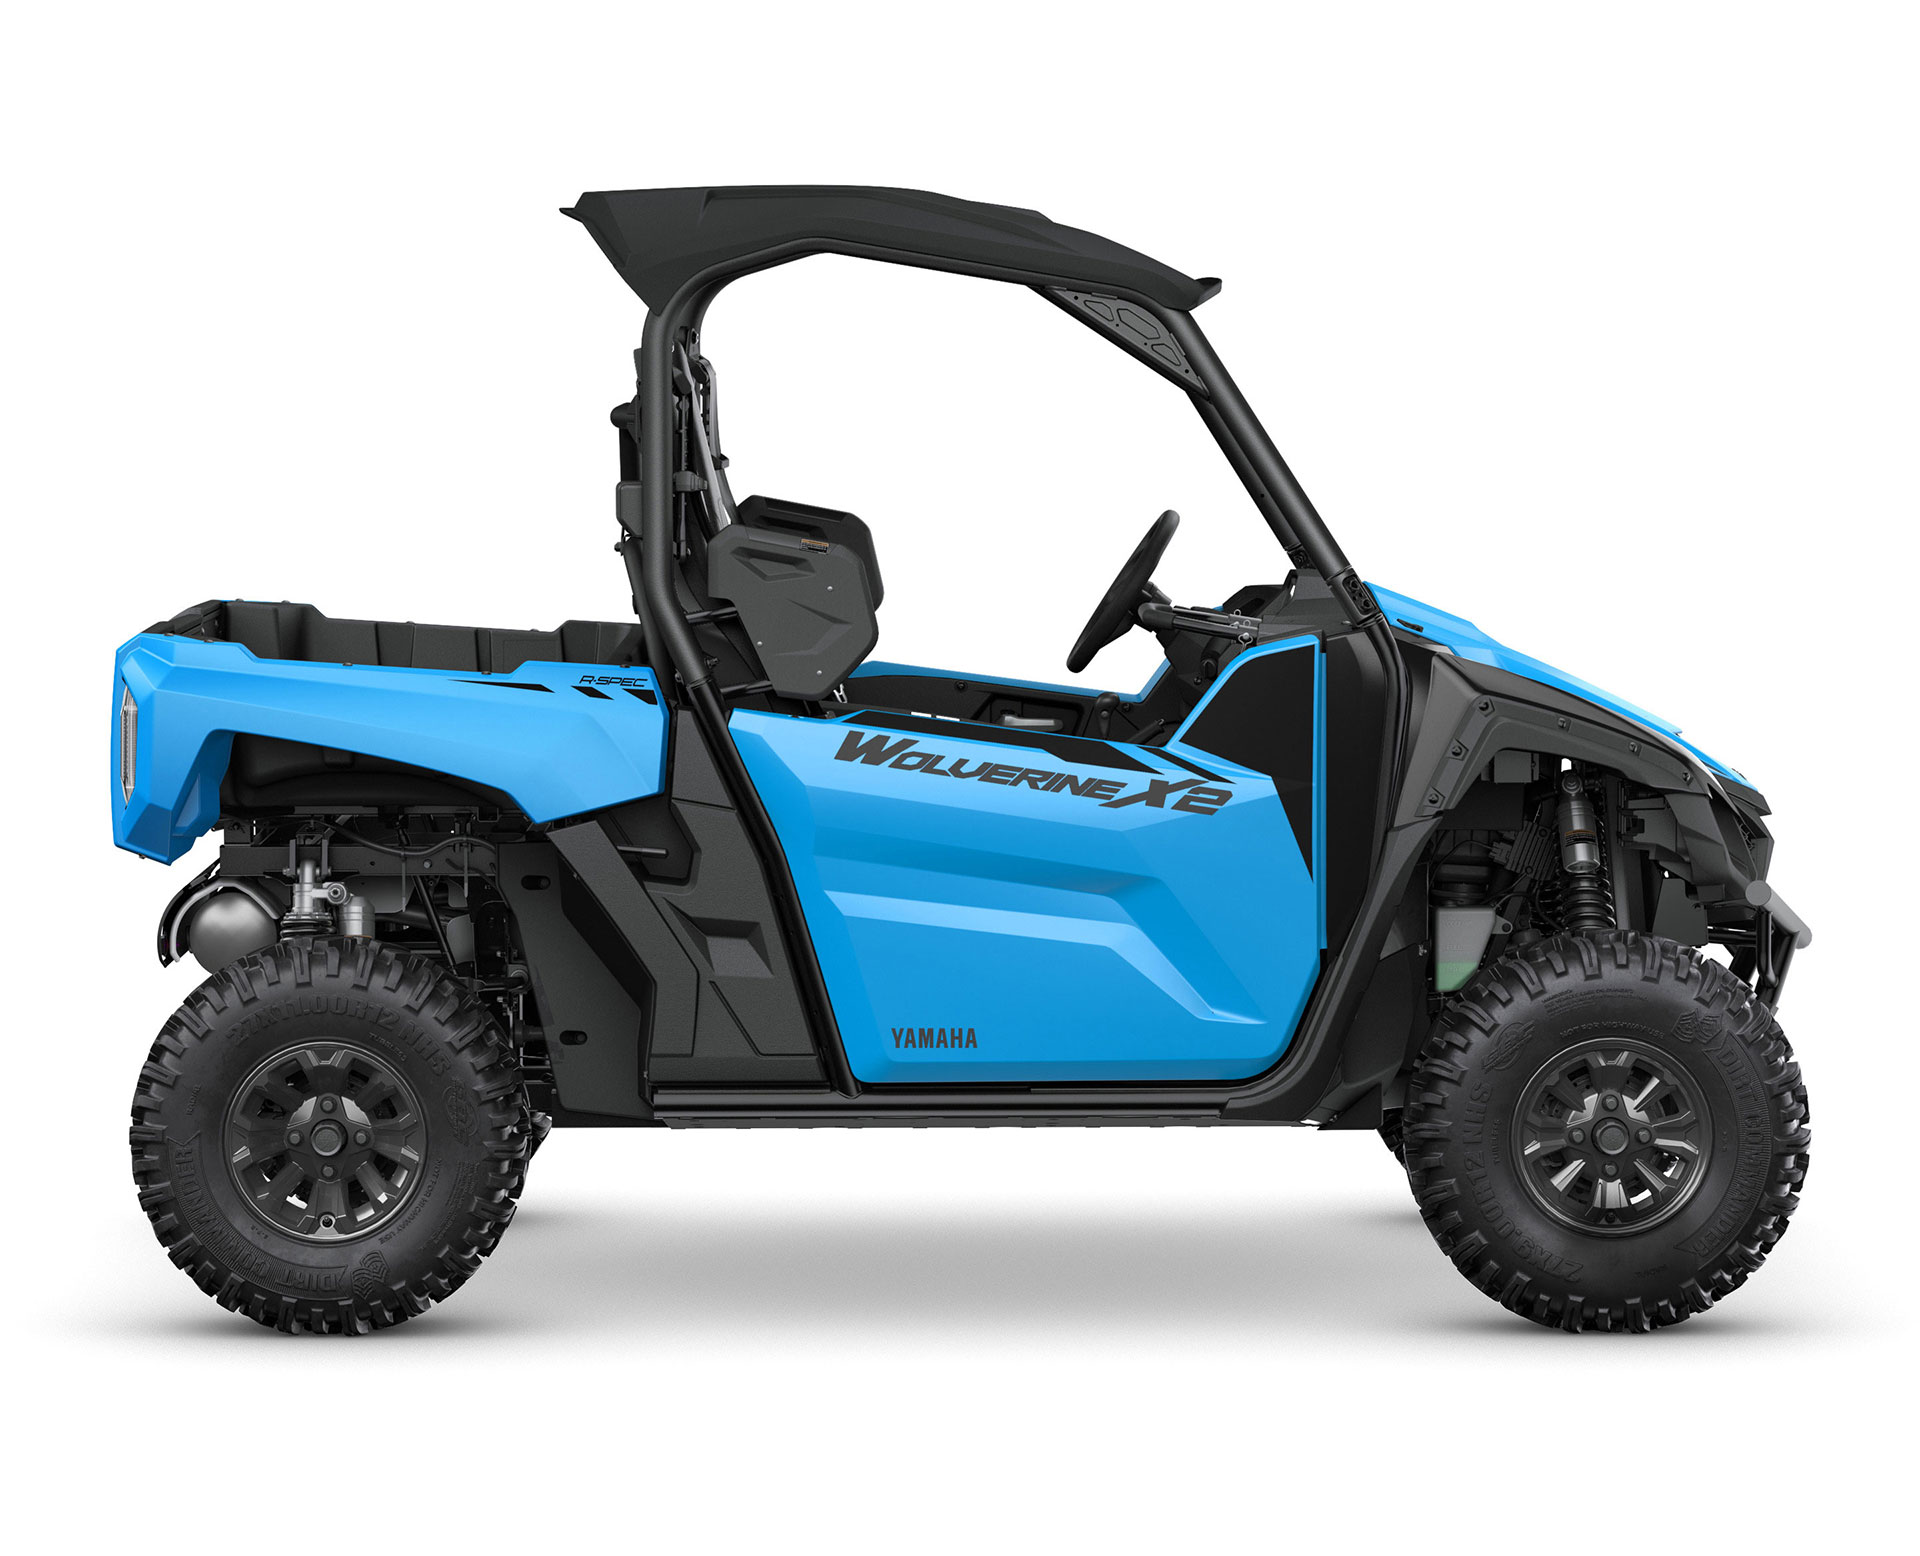 Thumbnail of your customized 2023 WOLVERINE X2 850 R-SPEC